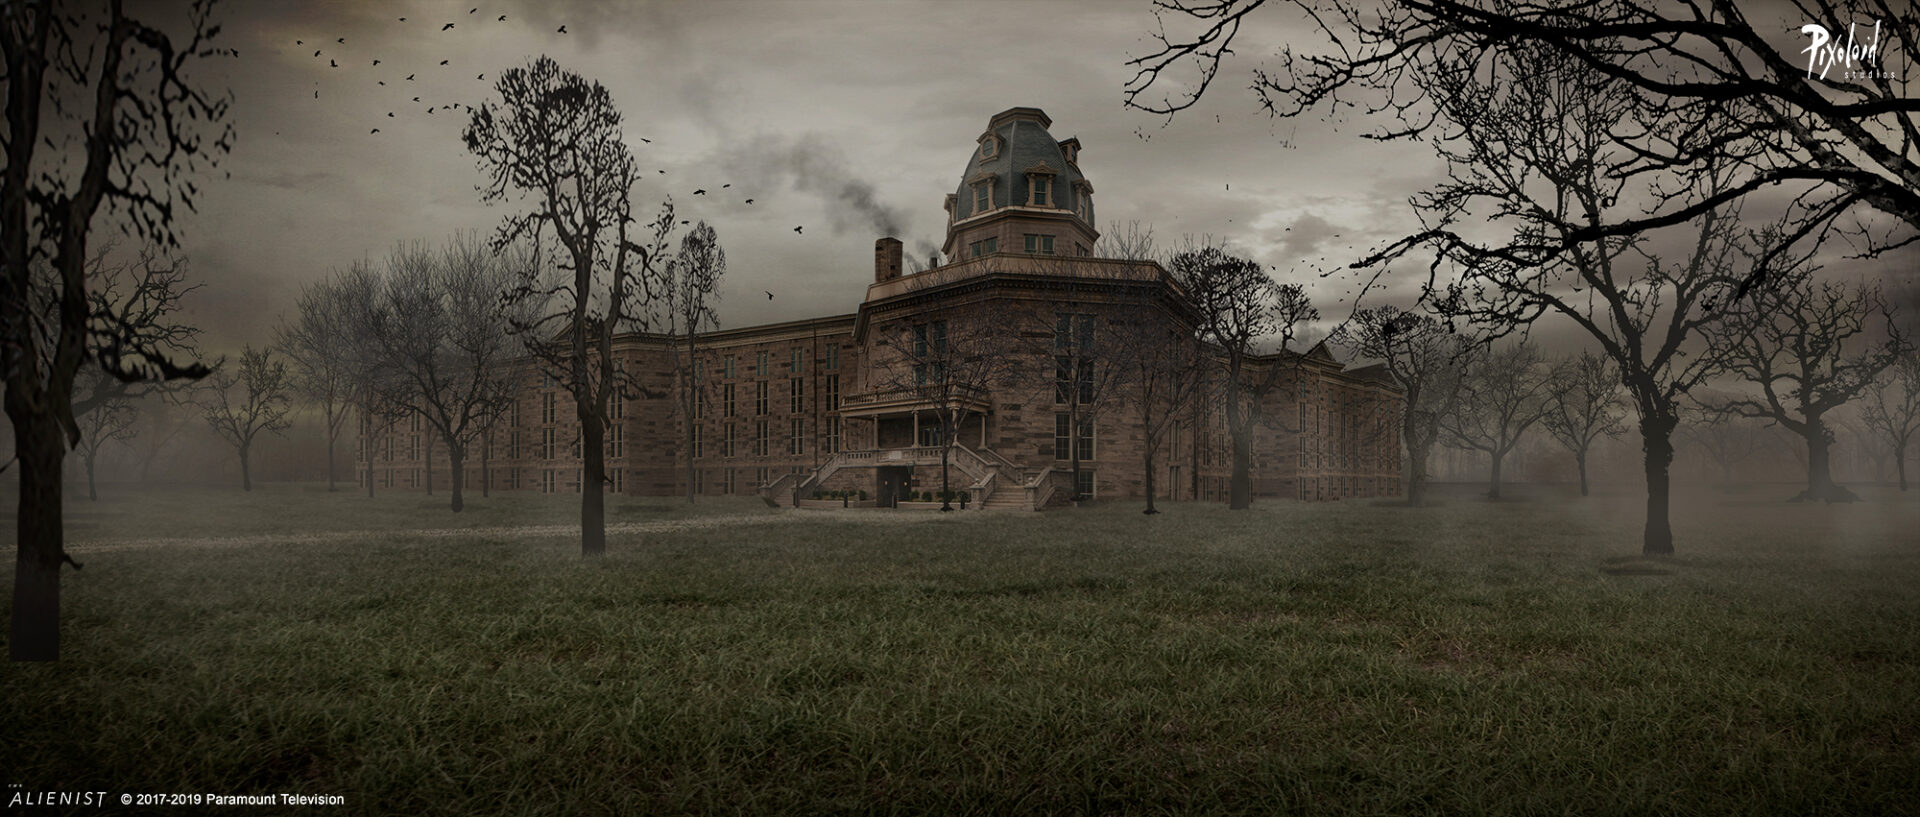 Blackwell Island Asylum - Location and keyframe concept design for The Alienist